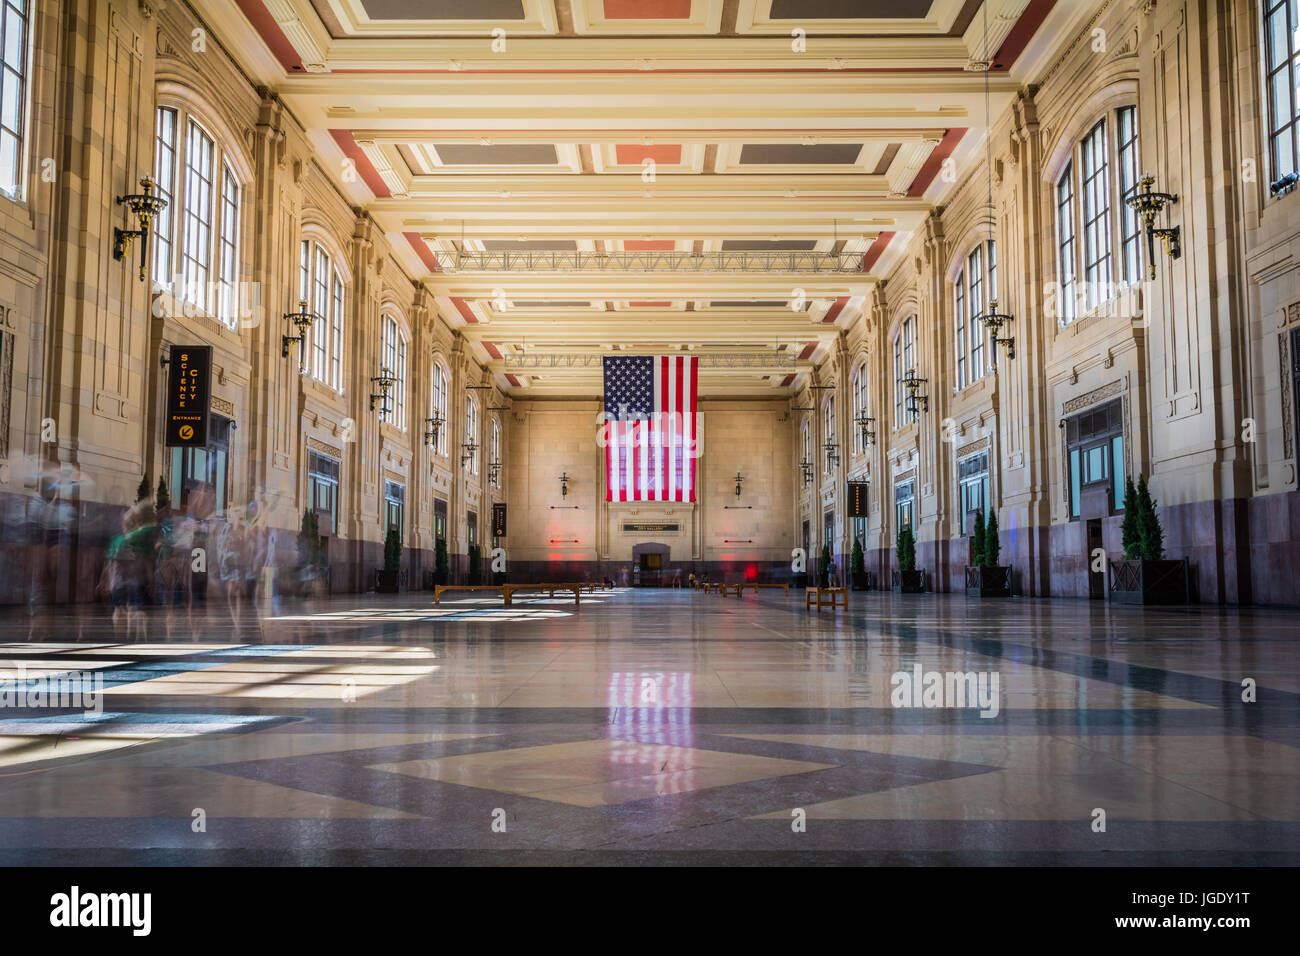 A detail shot of the front of Union Station at the Kansas City